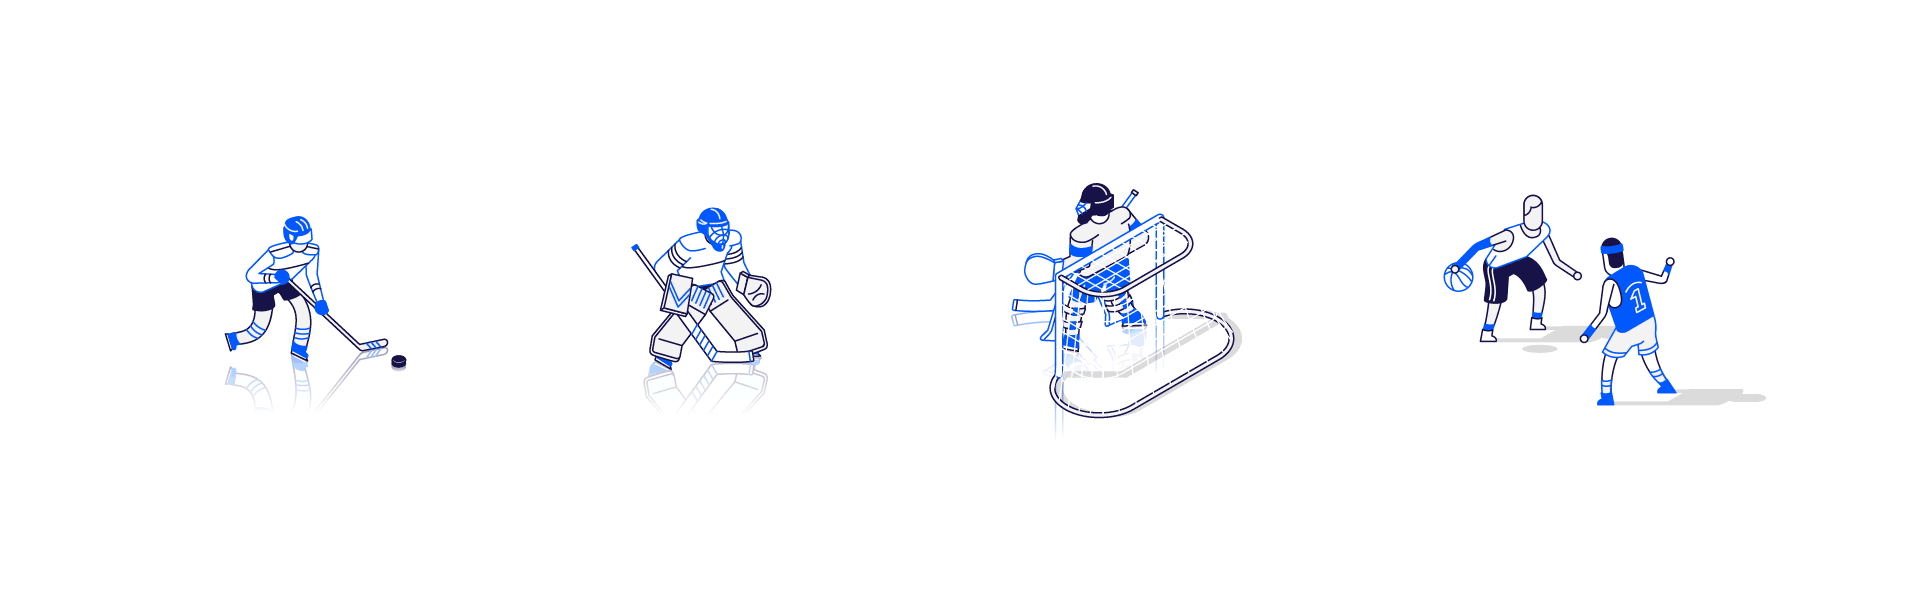 Illustration and animation of various characters playing different sports